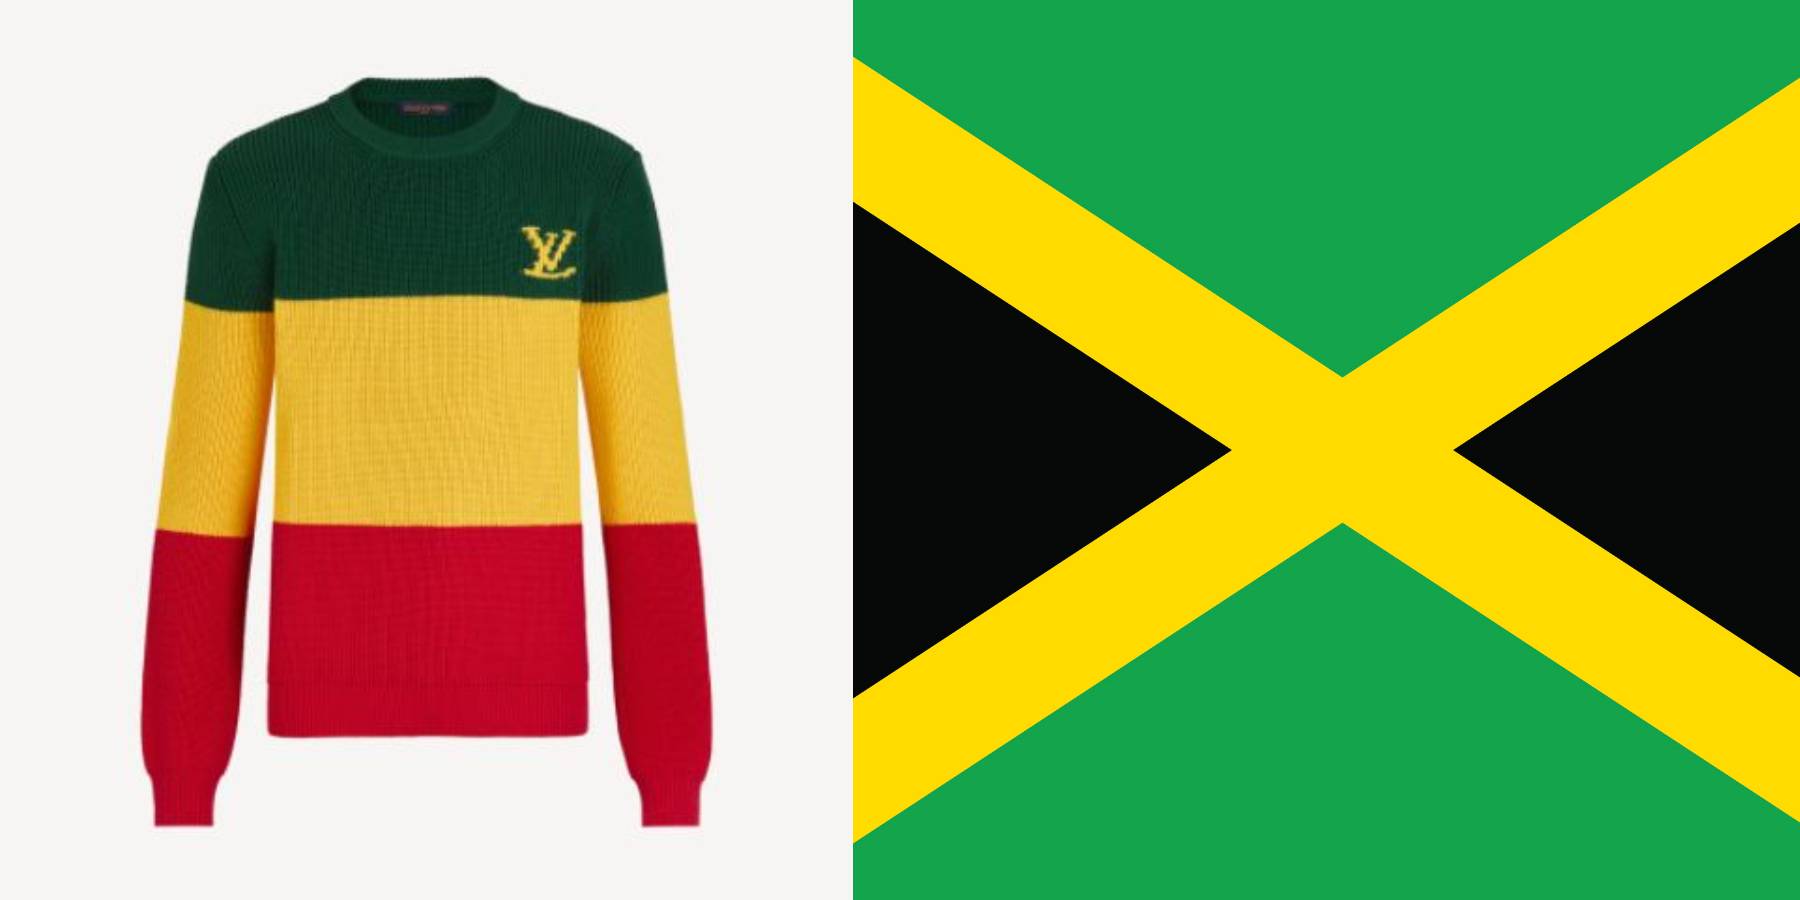 A Fail!: Louis Vuitton Designs A Sweater 'Inspired' By The Jamaican Flag,  And The Colors Are Completely Wrong, News